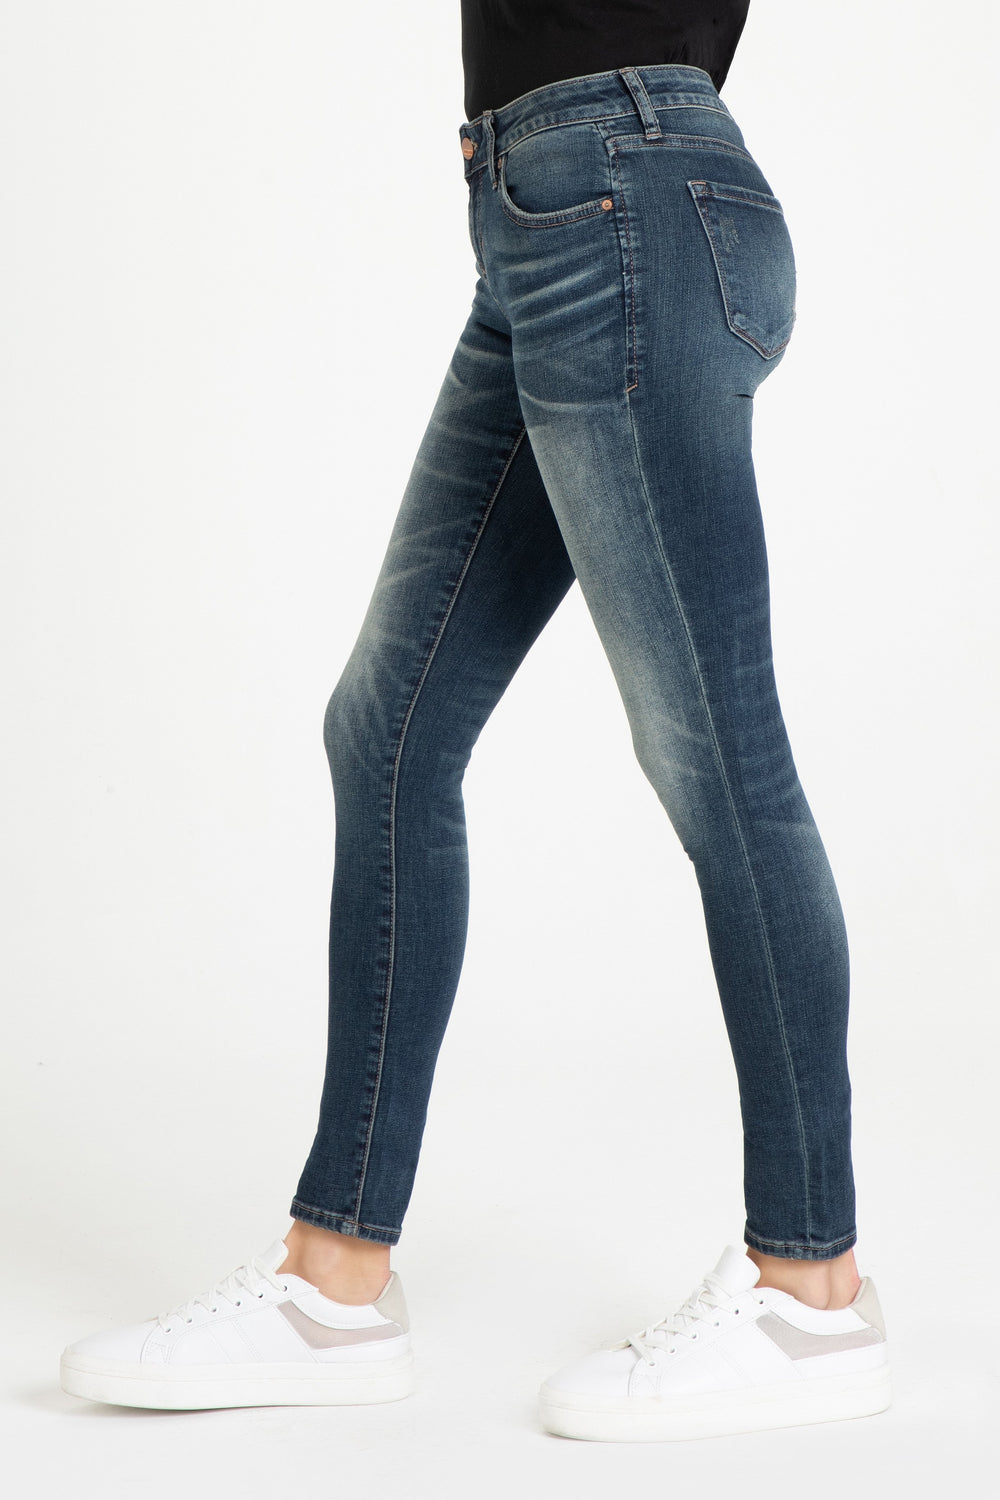 image of a female model wearing a JOYRICH MID RISE SKINNY JEANS KIRBY JEANS